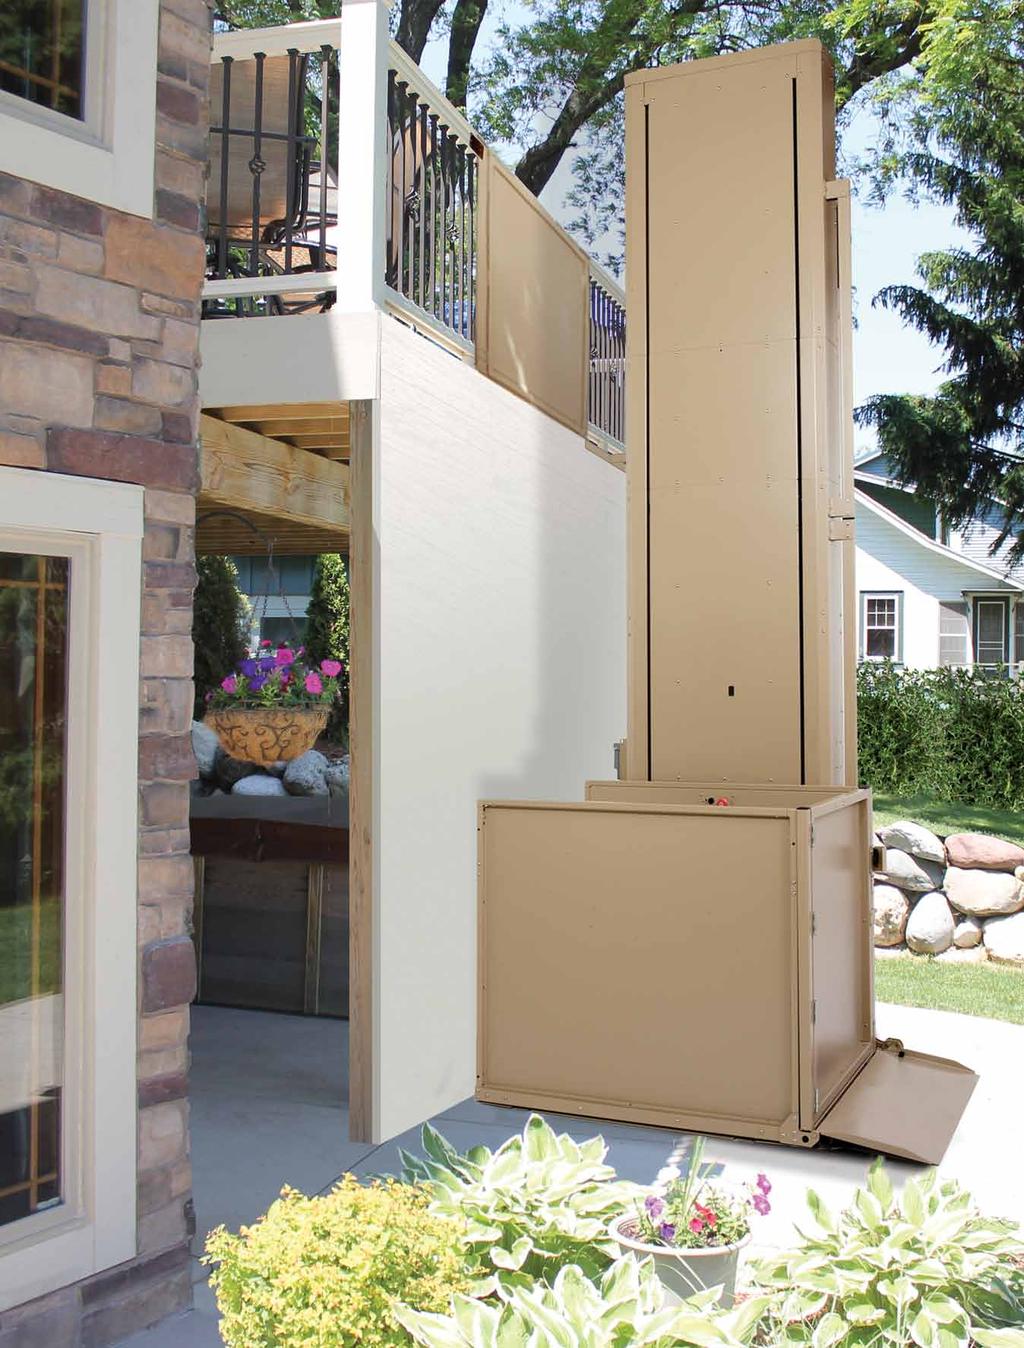 Bruno s Extended VPLs Provide Simple Access from Floor to Floor Down to the basement, up to a deck